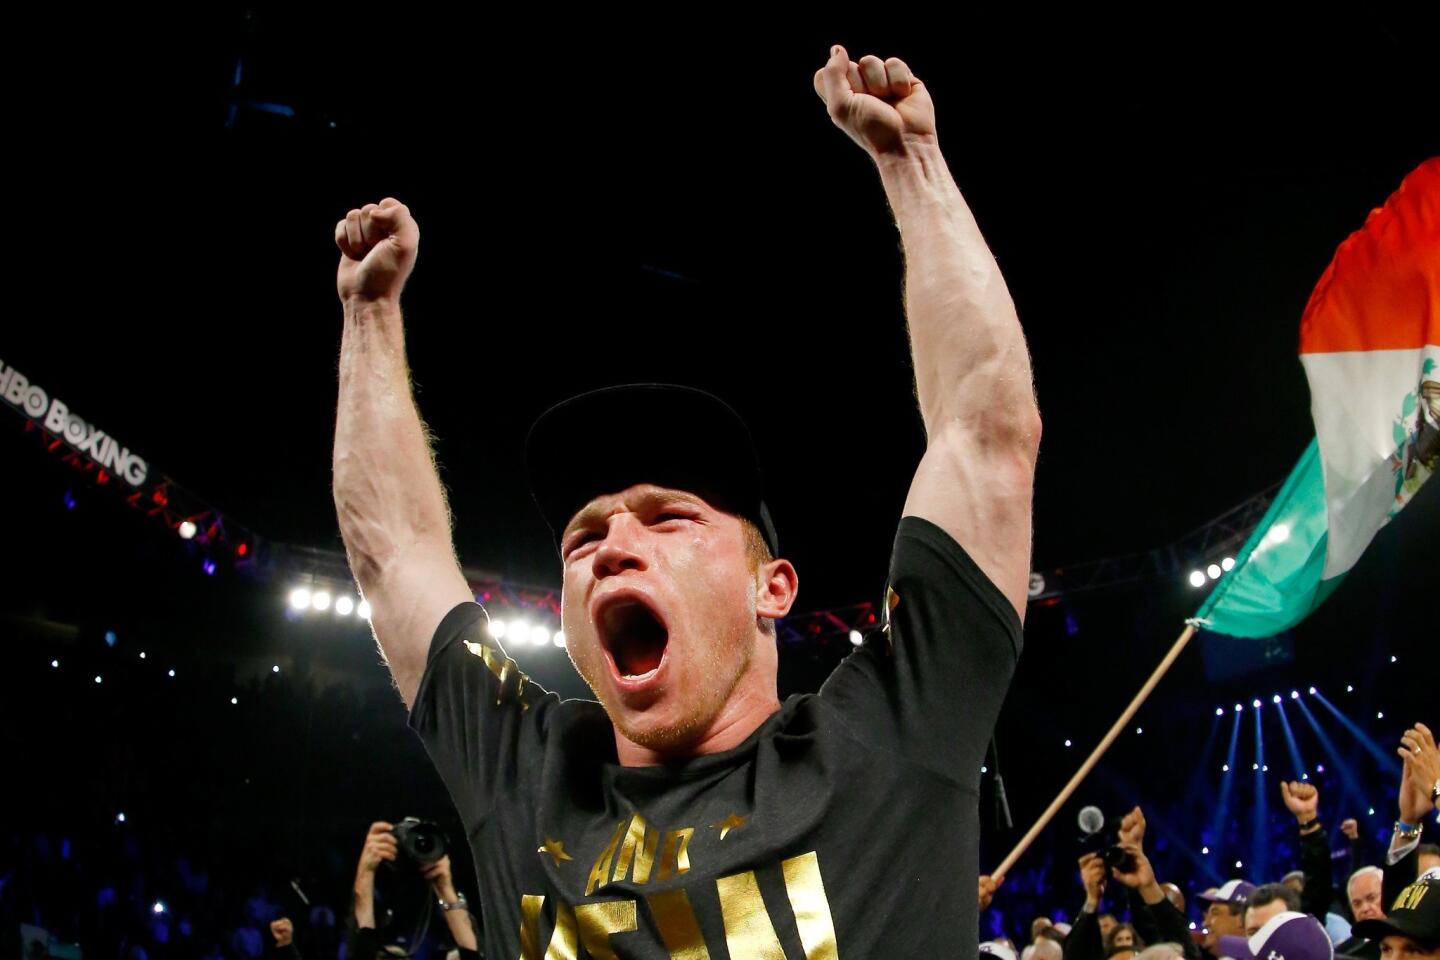 Canelo Alvarez celebrates after defeating Miguel Cotto by unanimous decision in their middleweight fight at the Mandalay Bay Events Center on November 21, 2015 in Las Vegas, Nevada.